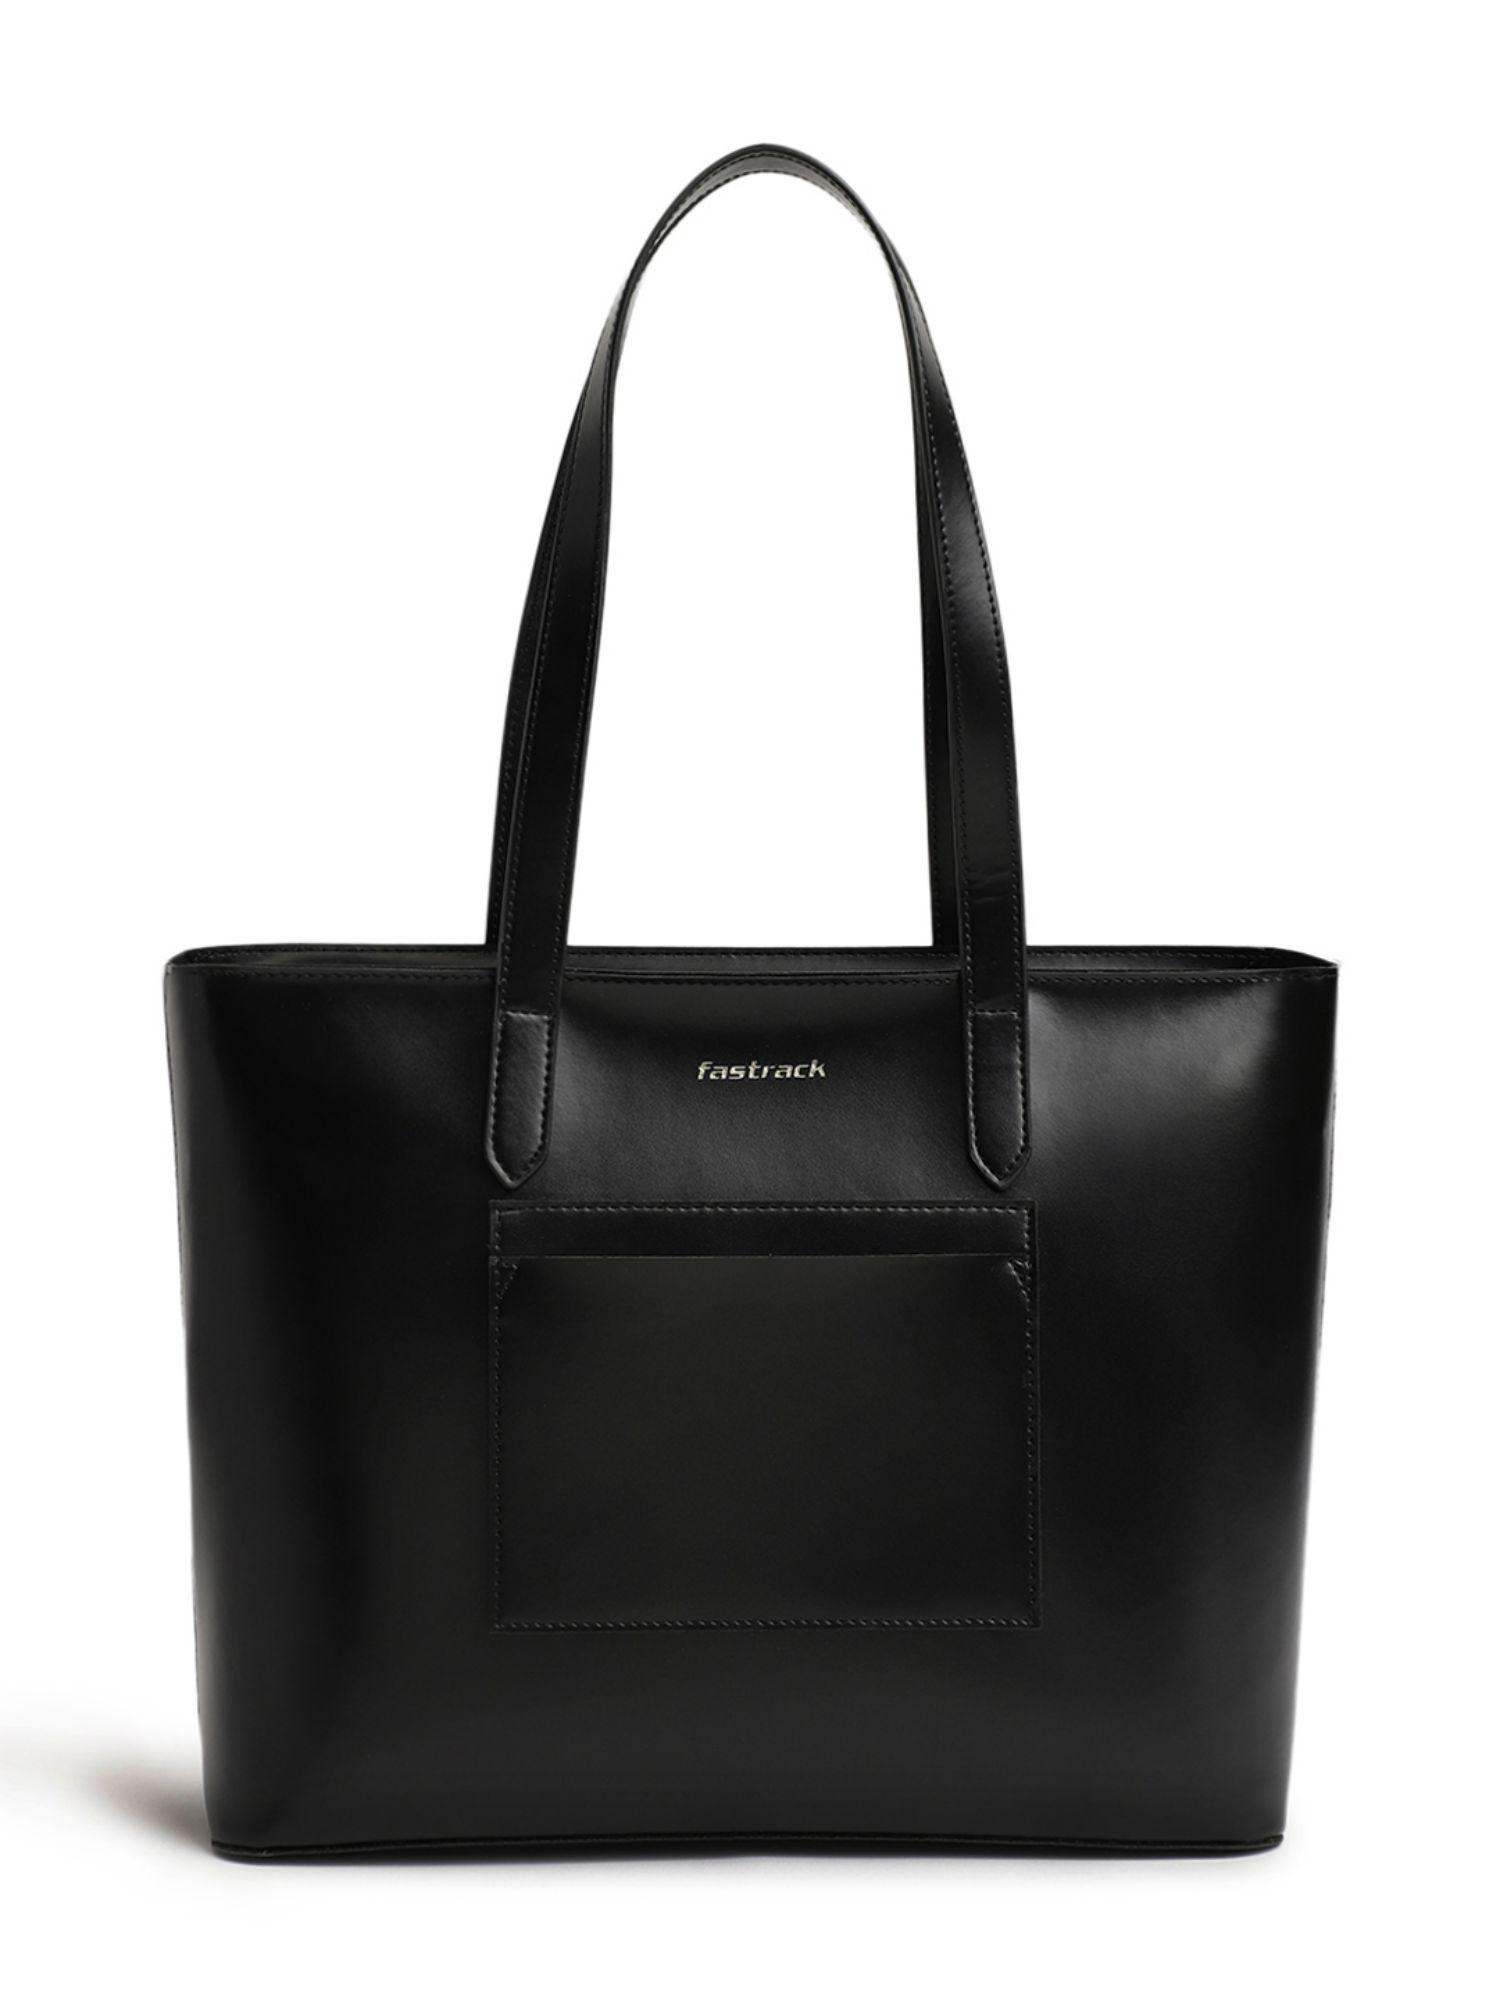 black chic tote bag for women